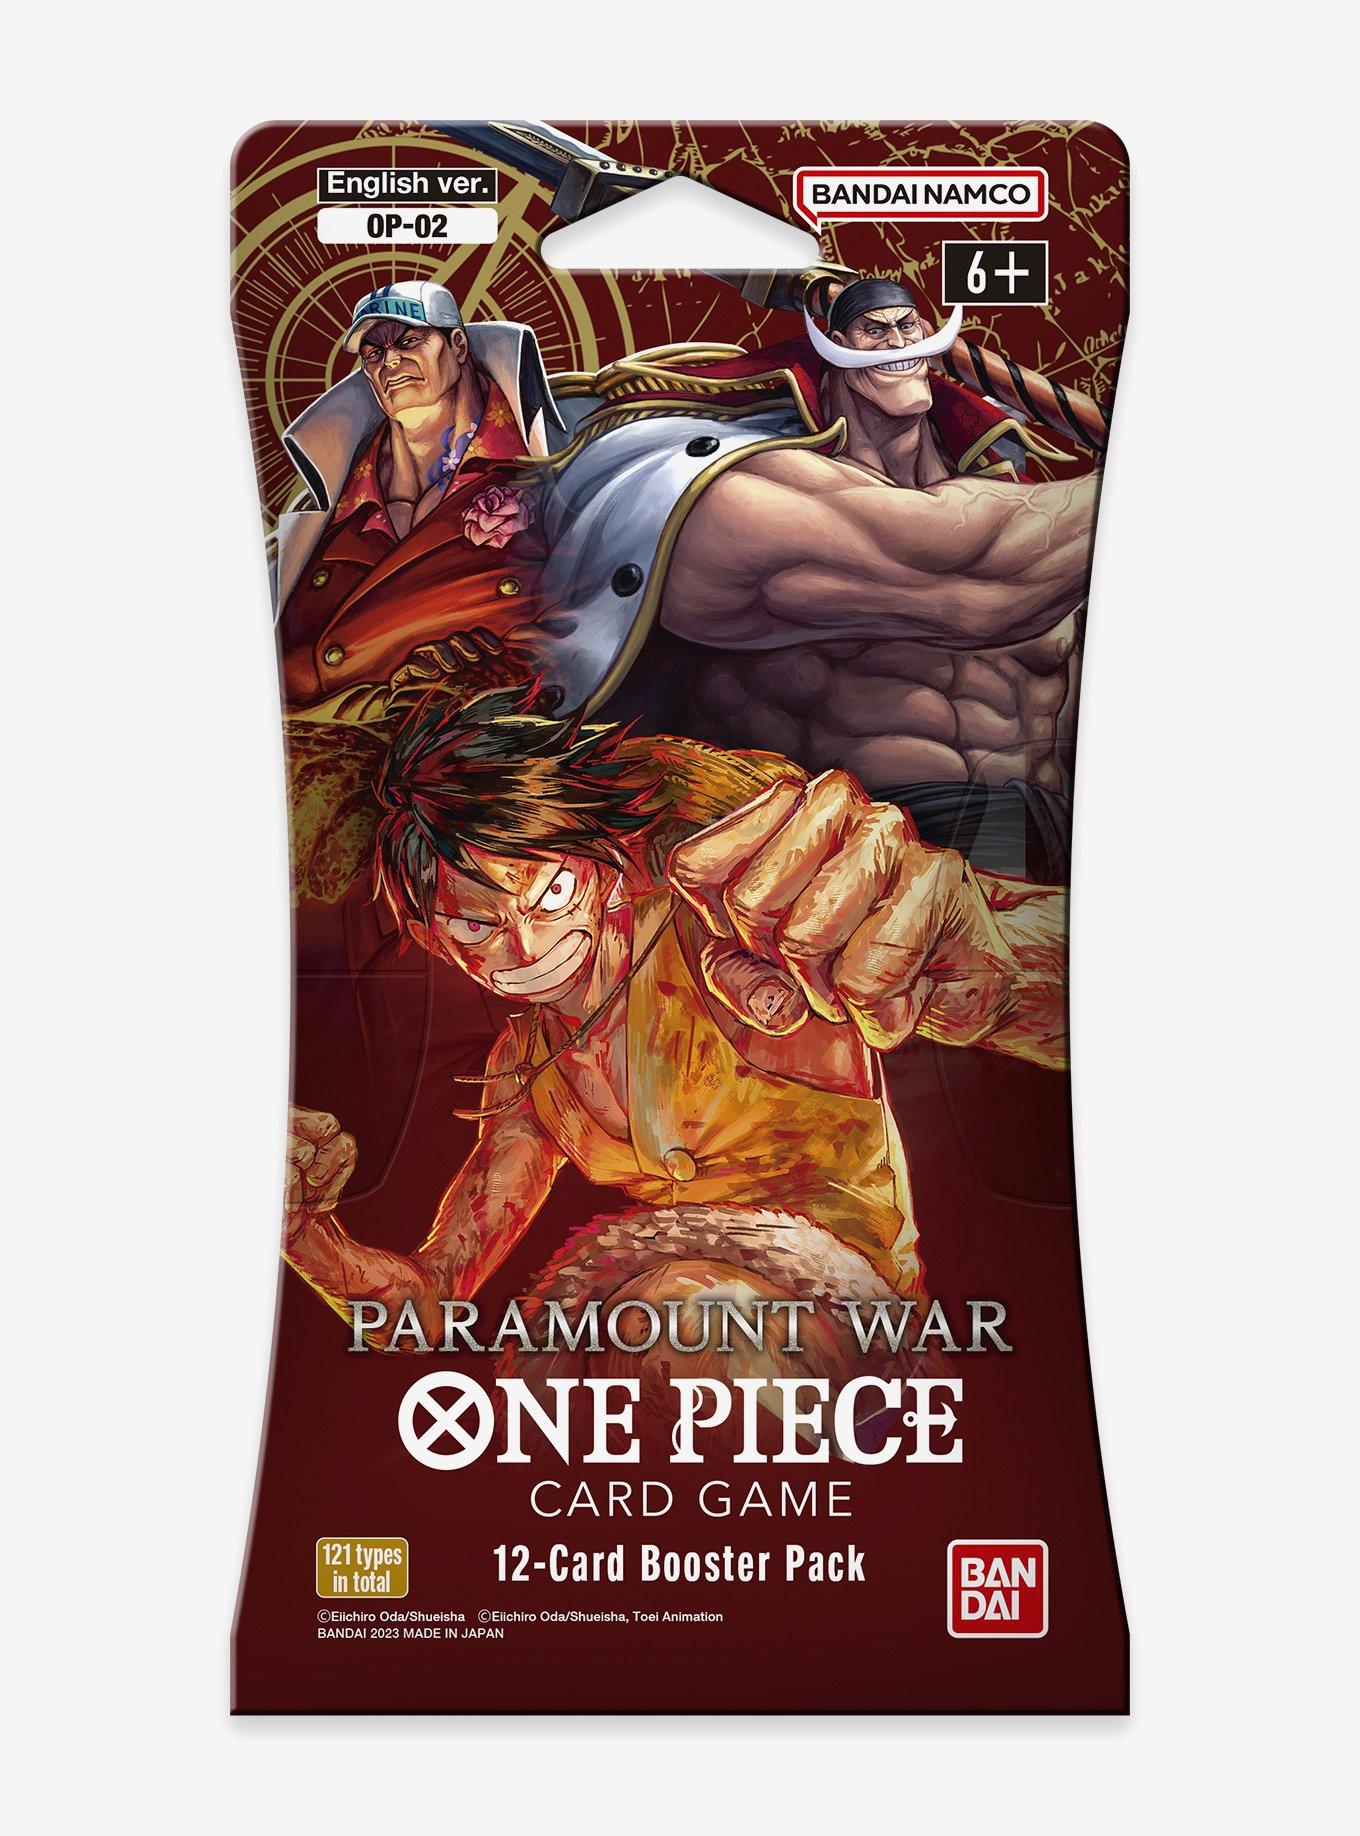 Fairy Tail Vs One Piece 2.0 - Play Free Online Games